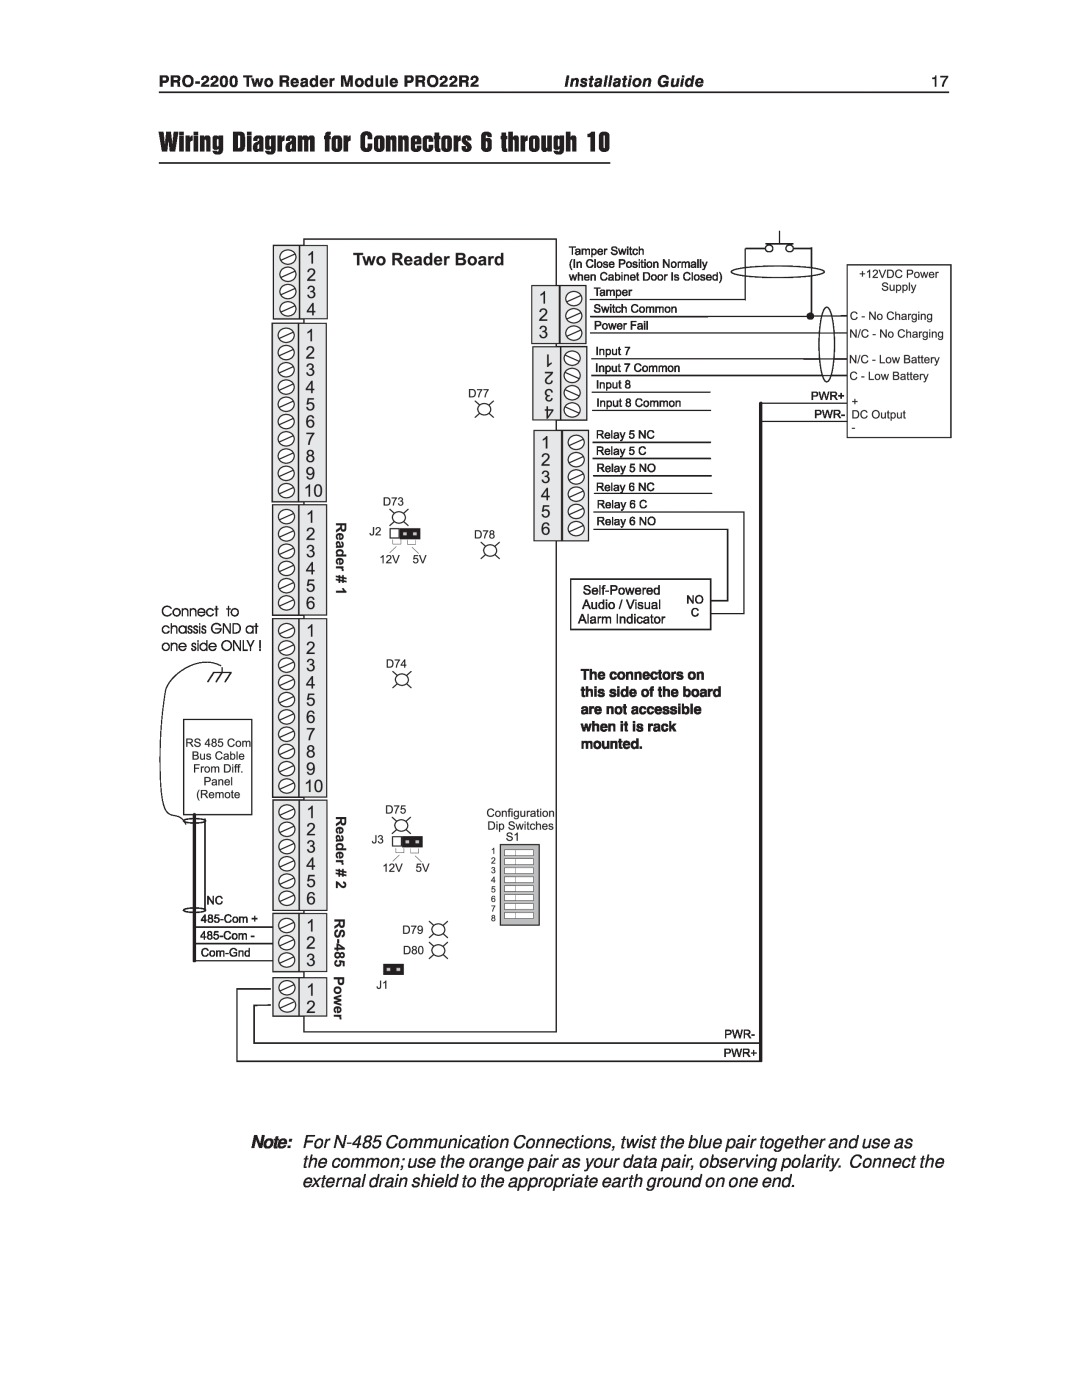 Honeywell Wiring Diagram for Connectors 6 through, PRO-2200Two Reader Module PRO22R2, Installation Guide 